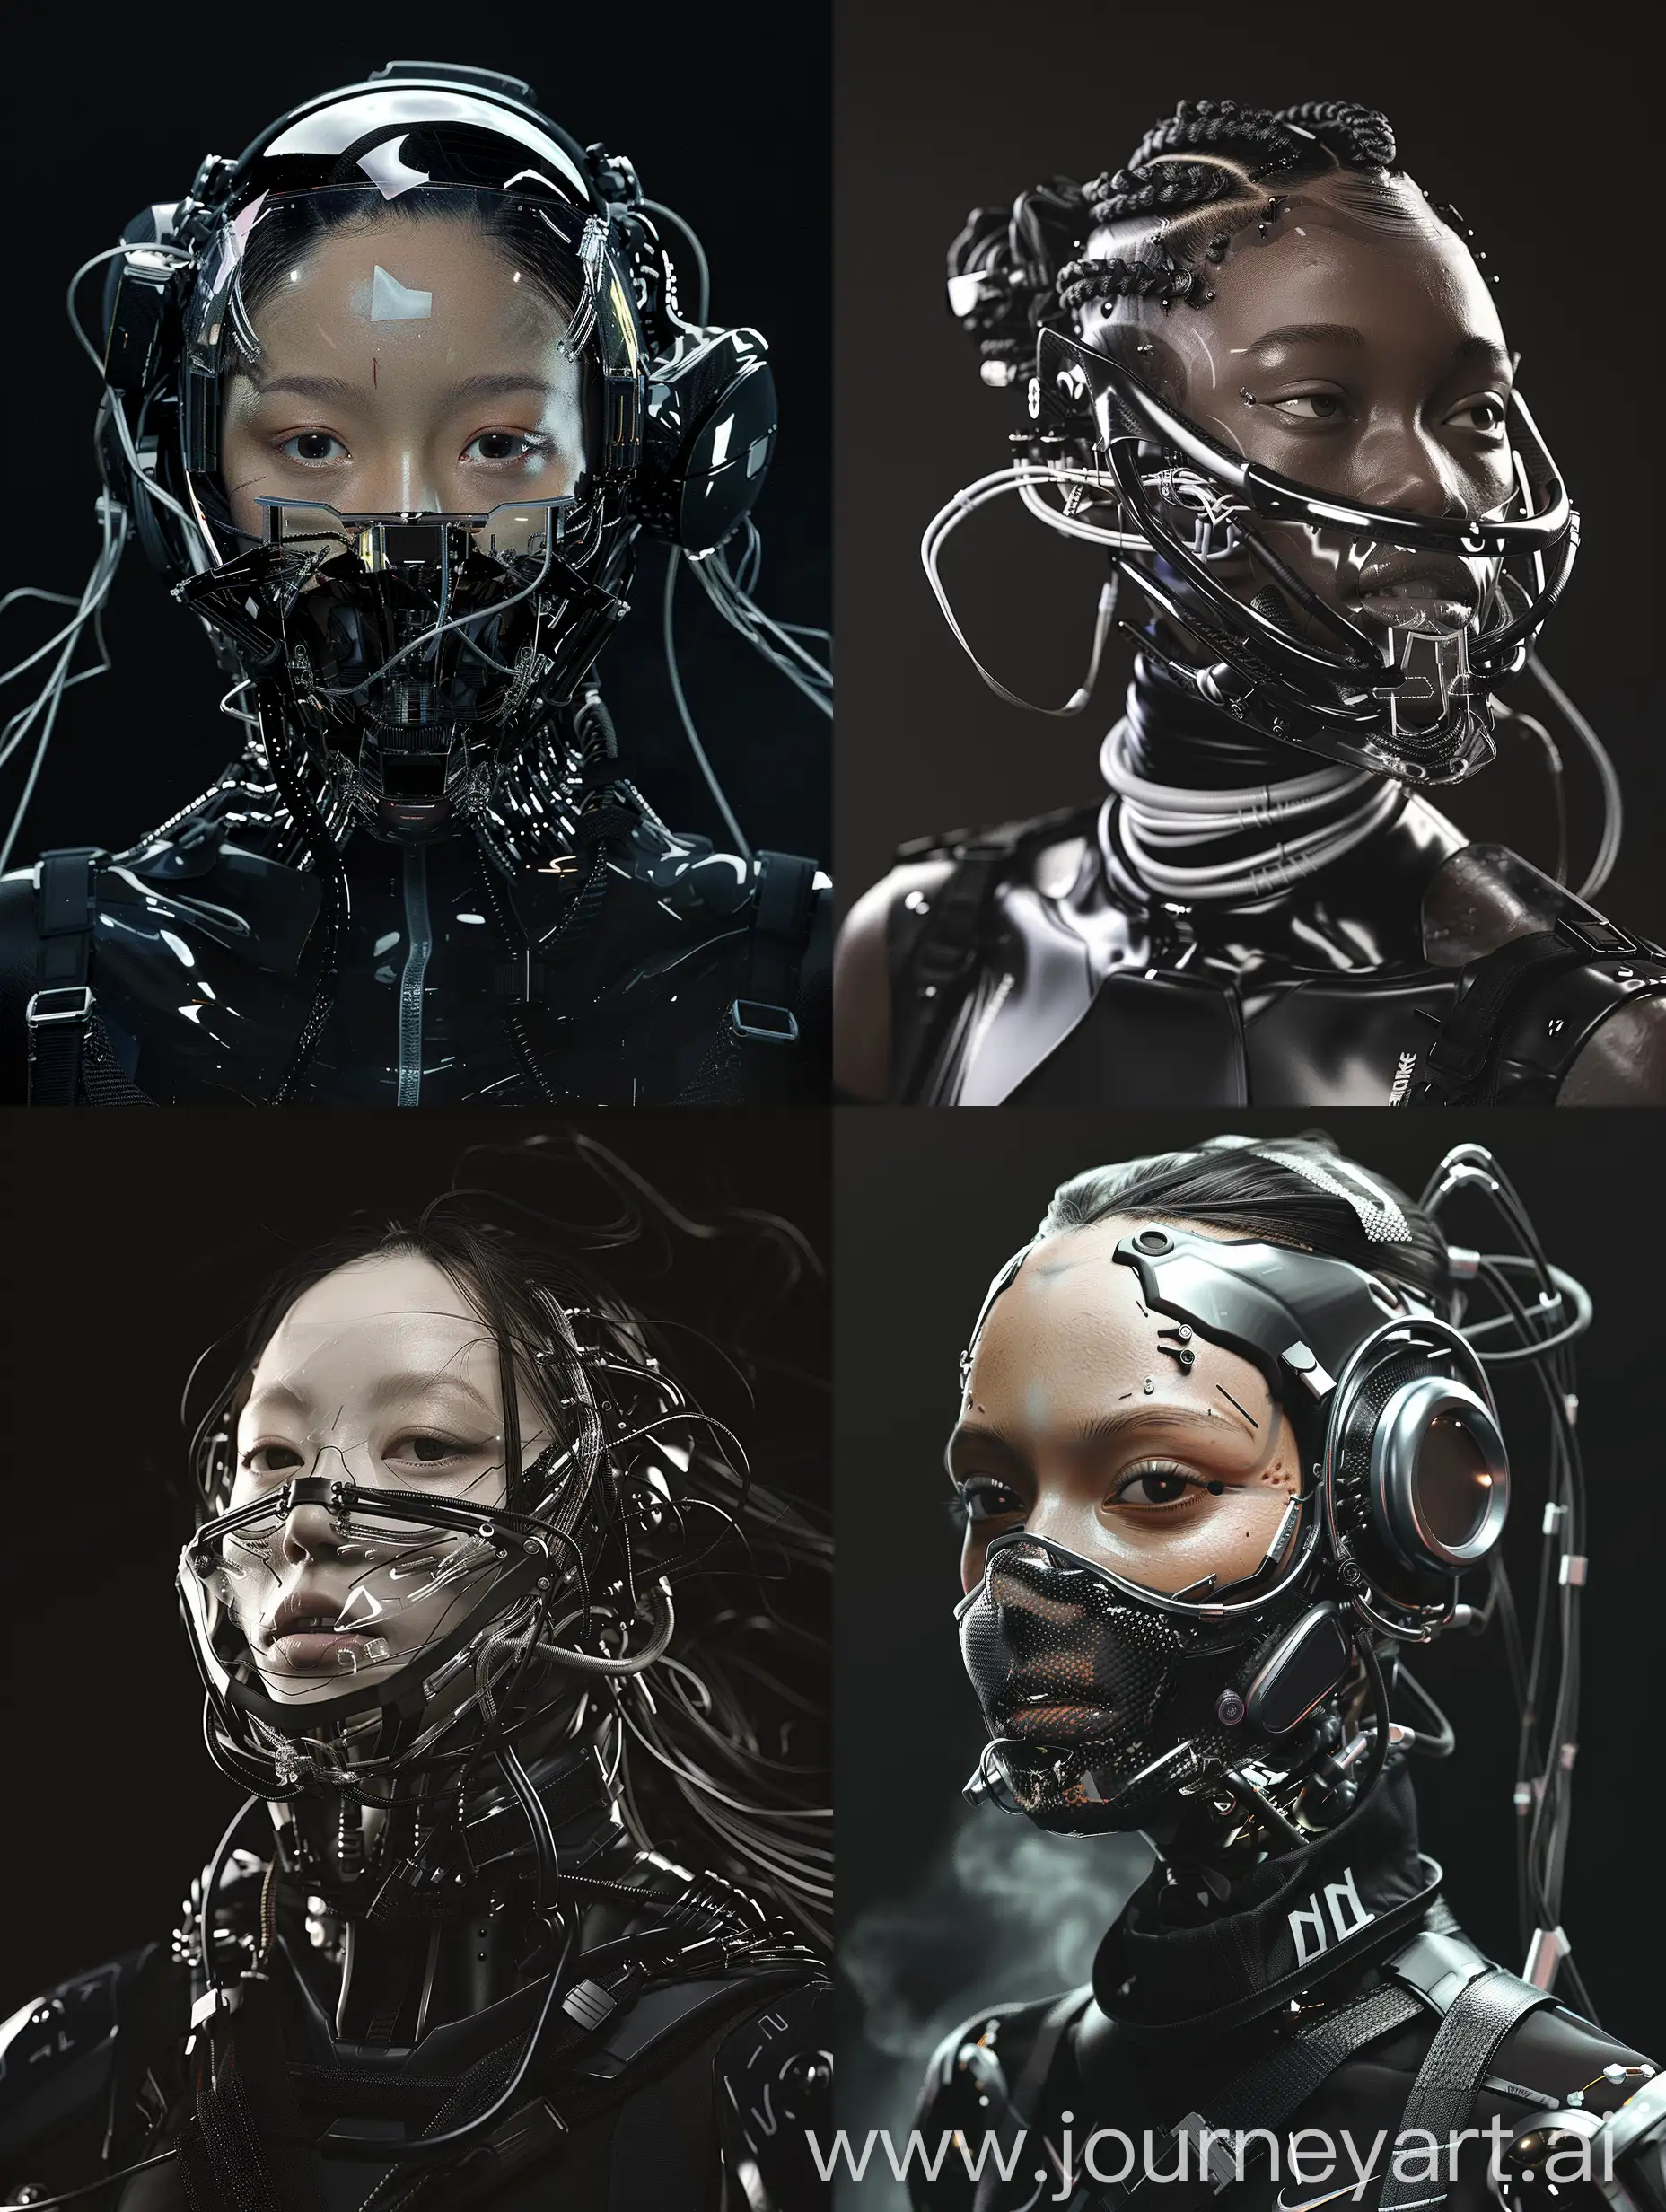 Futuristic-Cyberpunk-Character-with-Intricate-TechnoMask-and-NikeInspired-Addons